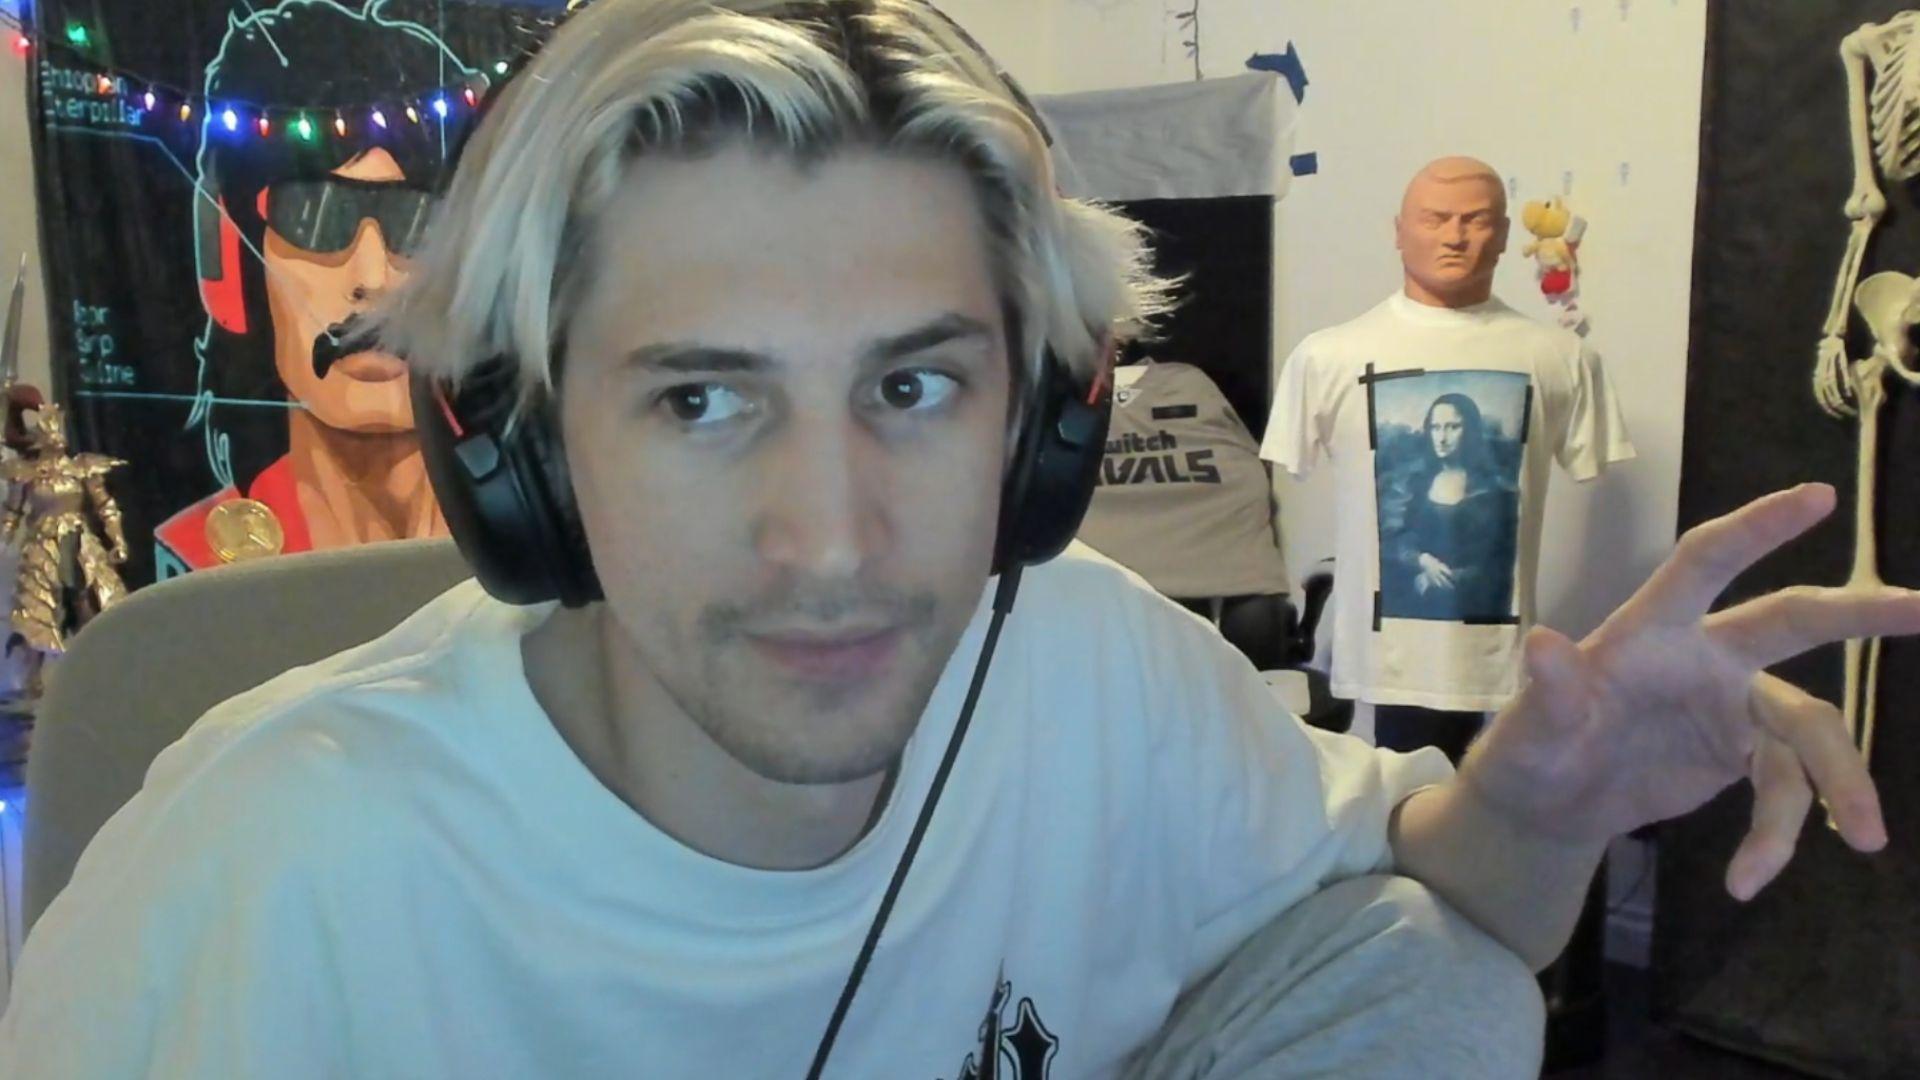 xQc in white shirt talking to camera with hand raised